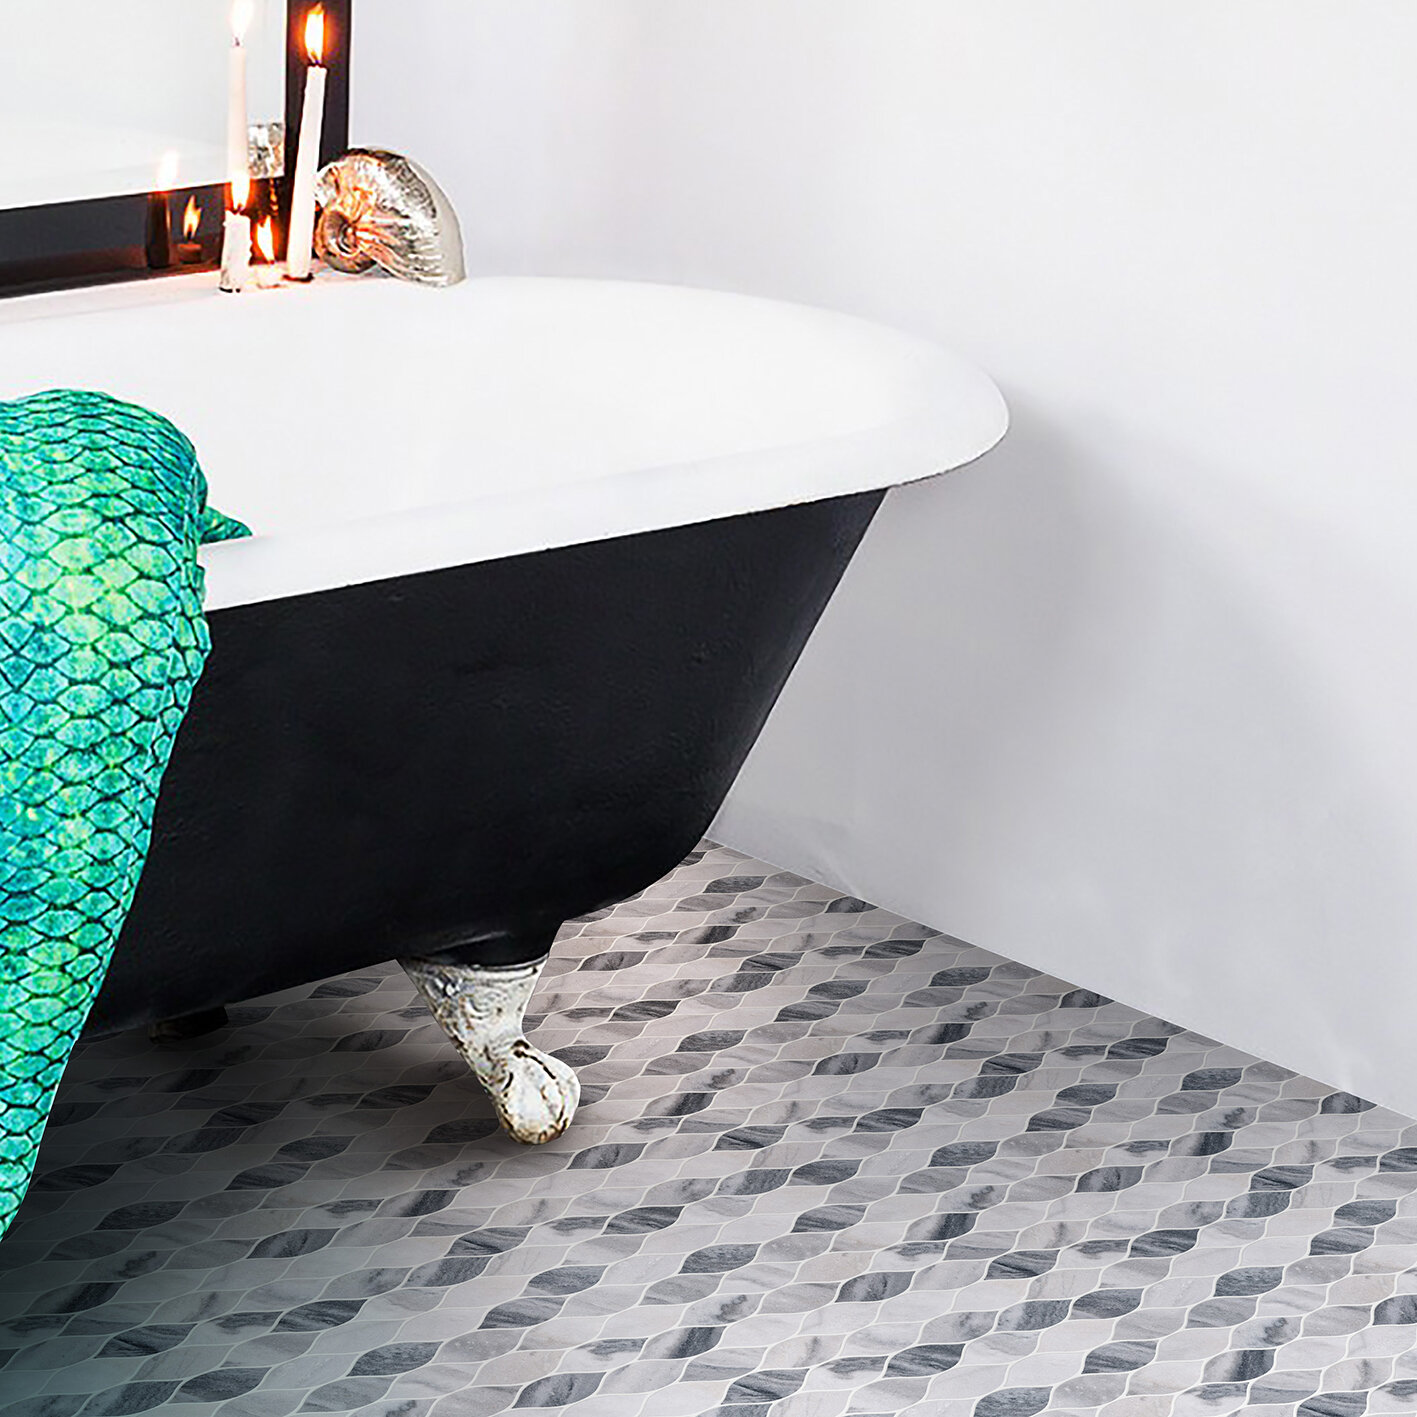 The 15 Best Tiled Bathrooms On Pinterest With Images Small